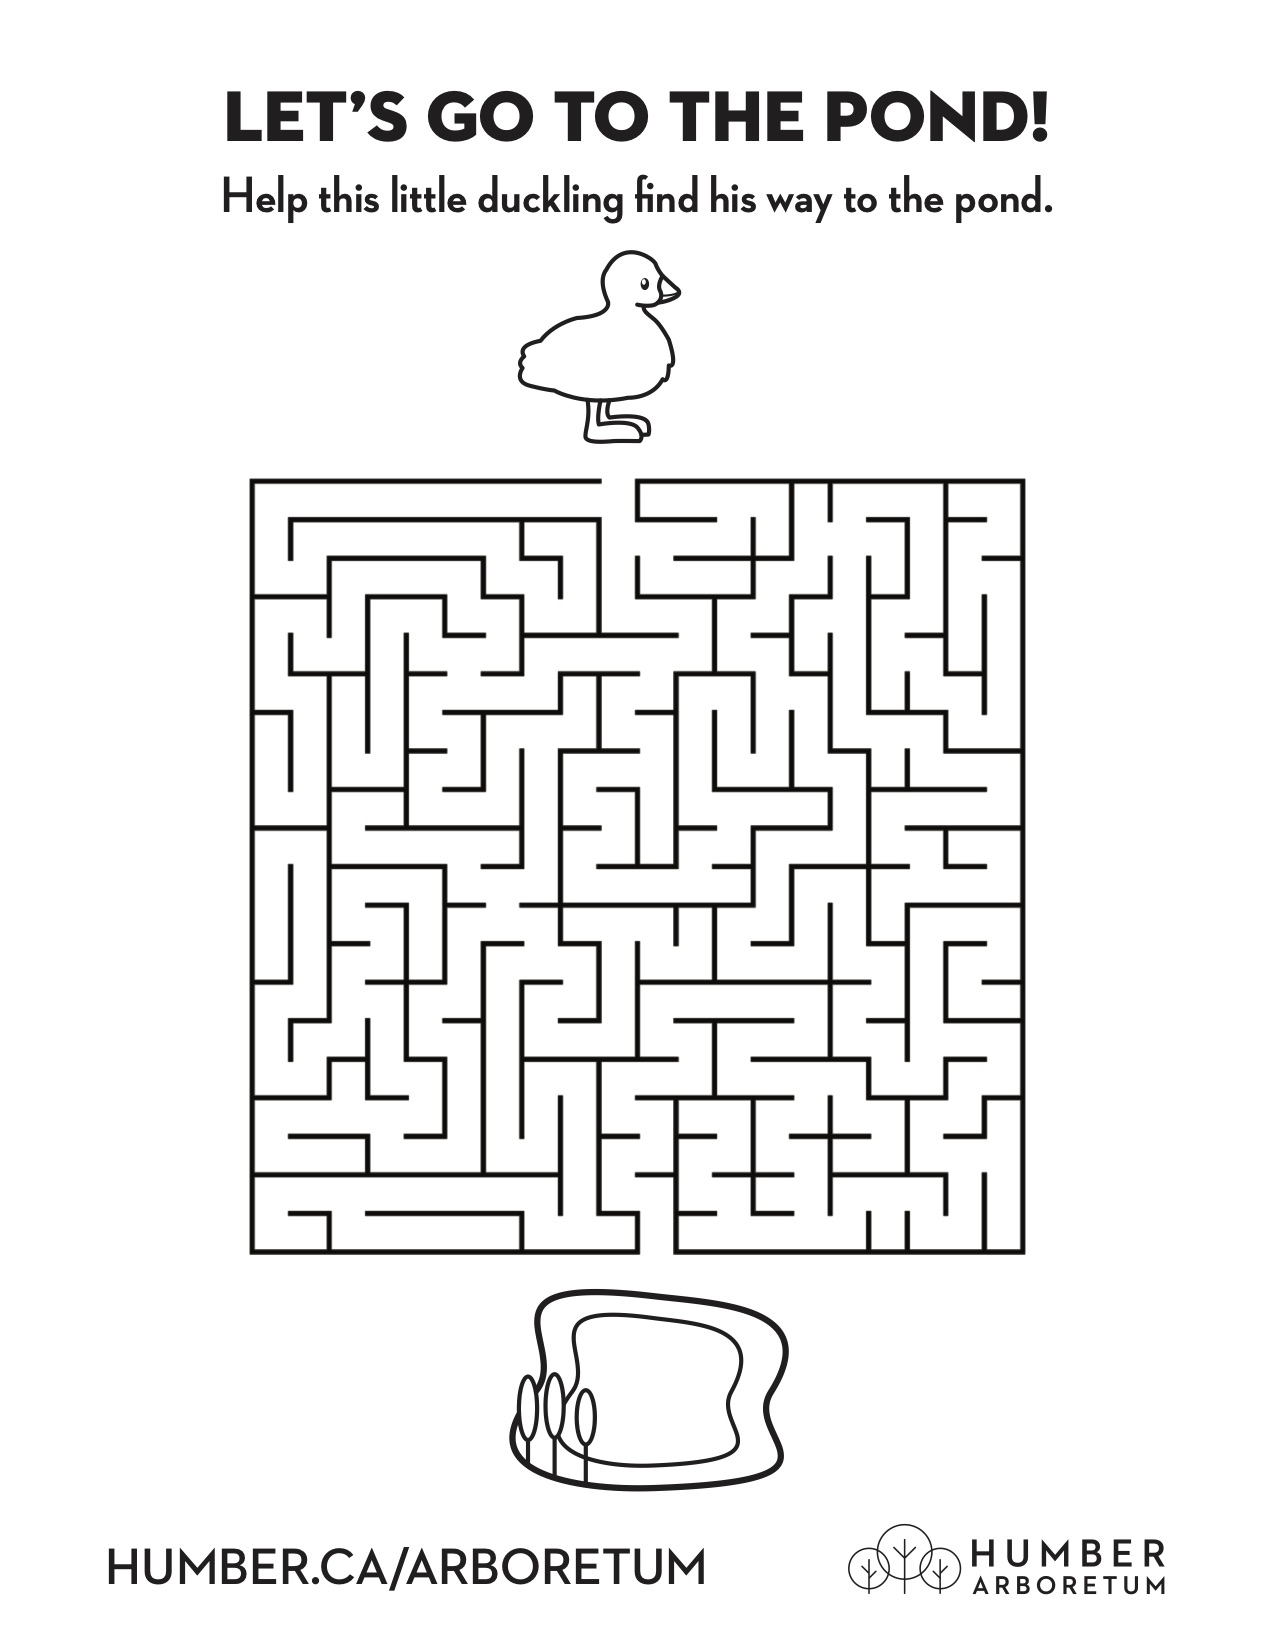 A maze with a duckling at the start and a pond at the finish